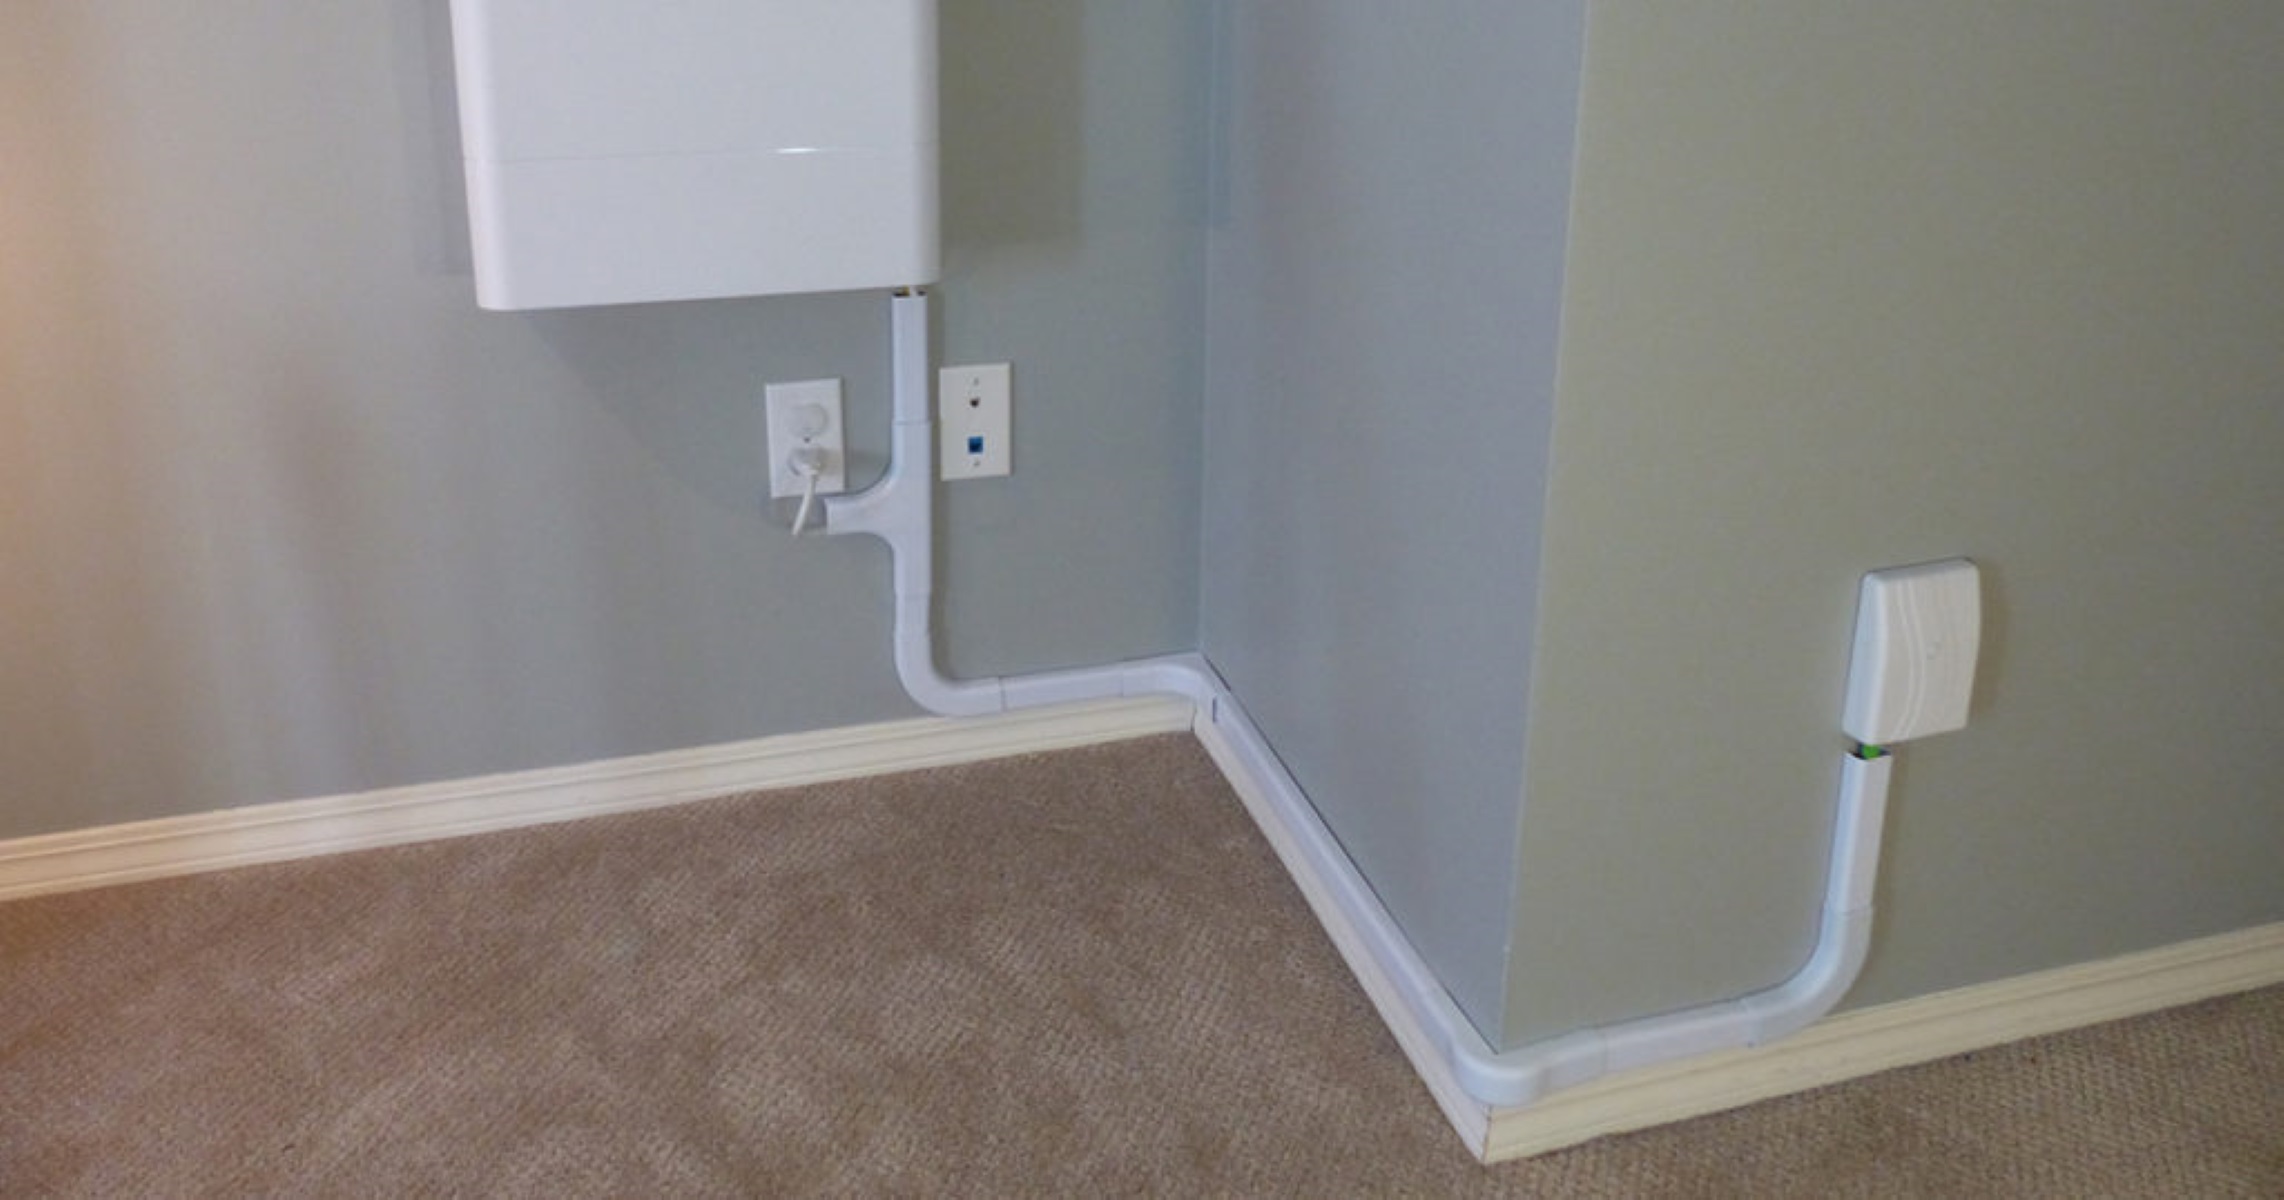 how-to-attach-ethernet-cable-to-wall